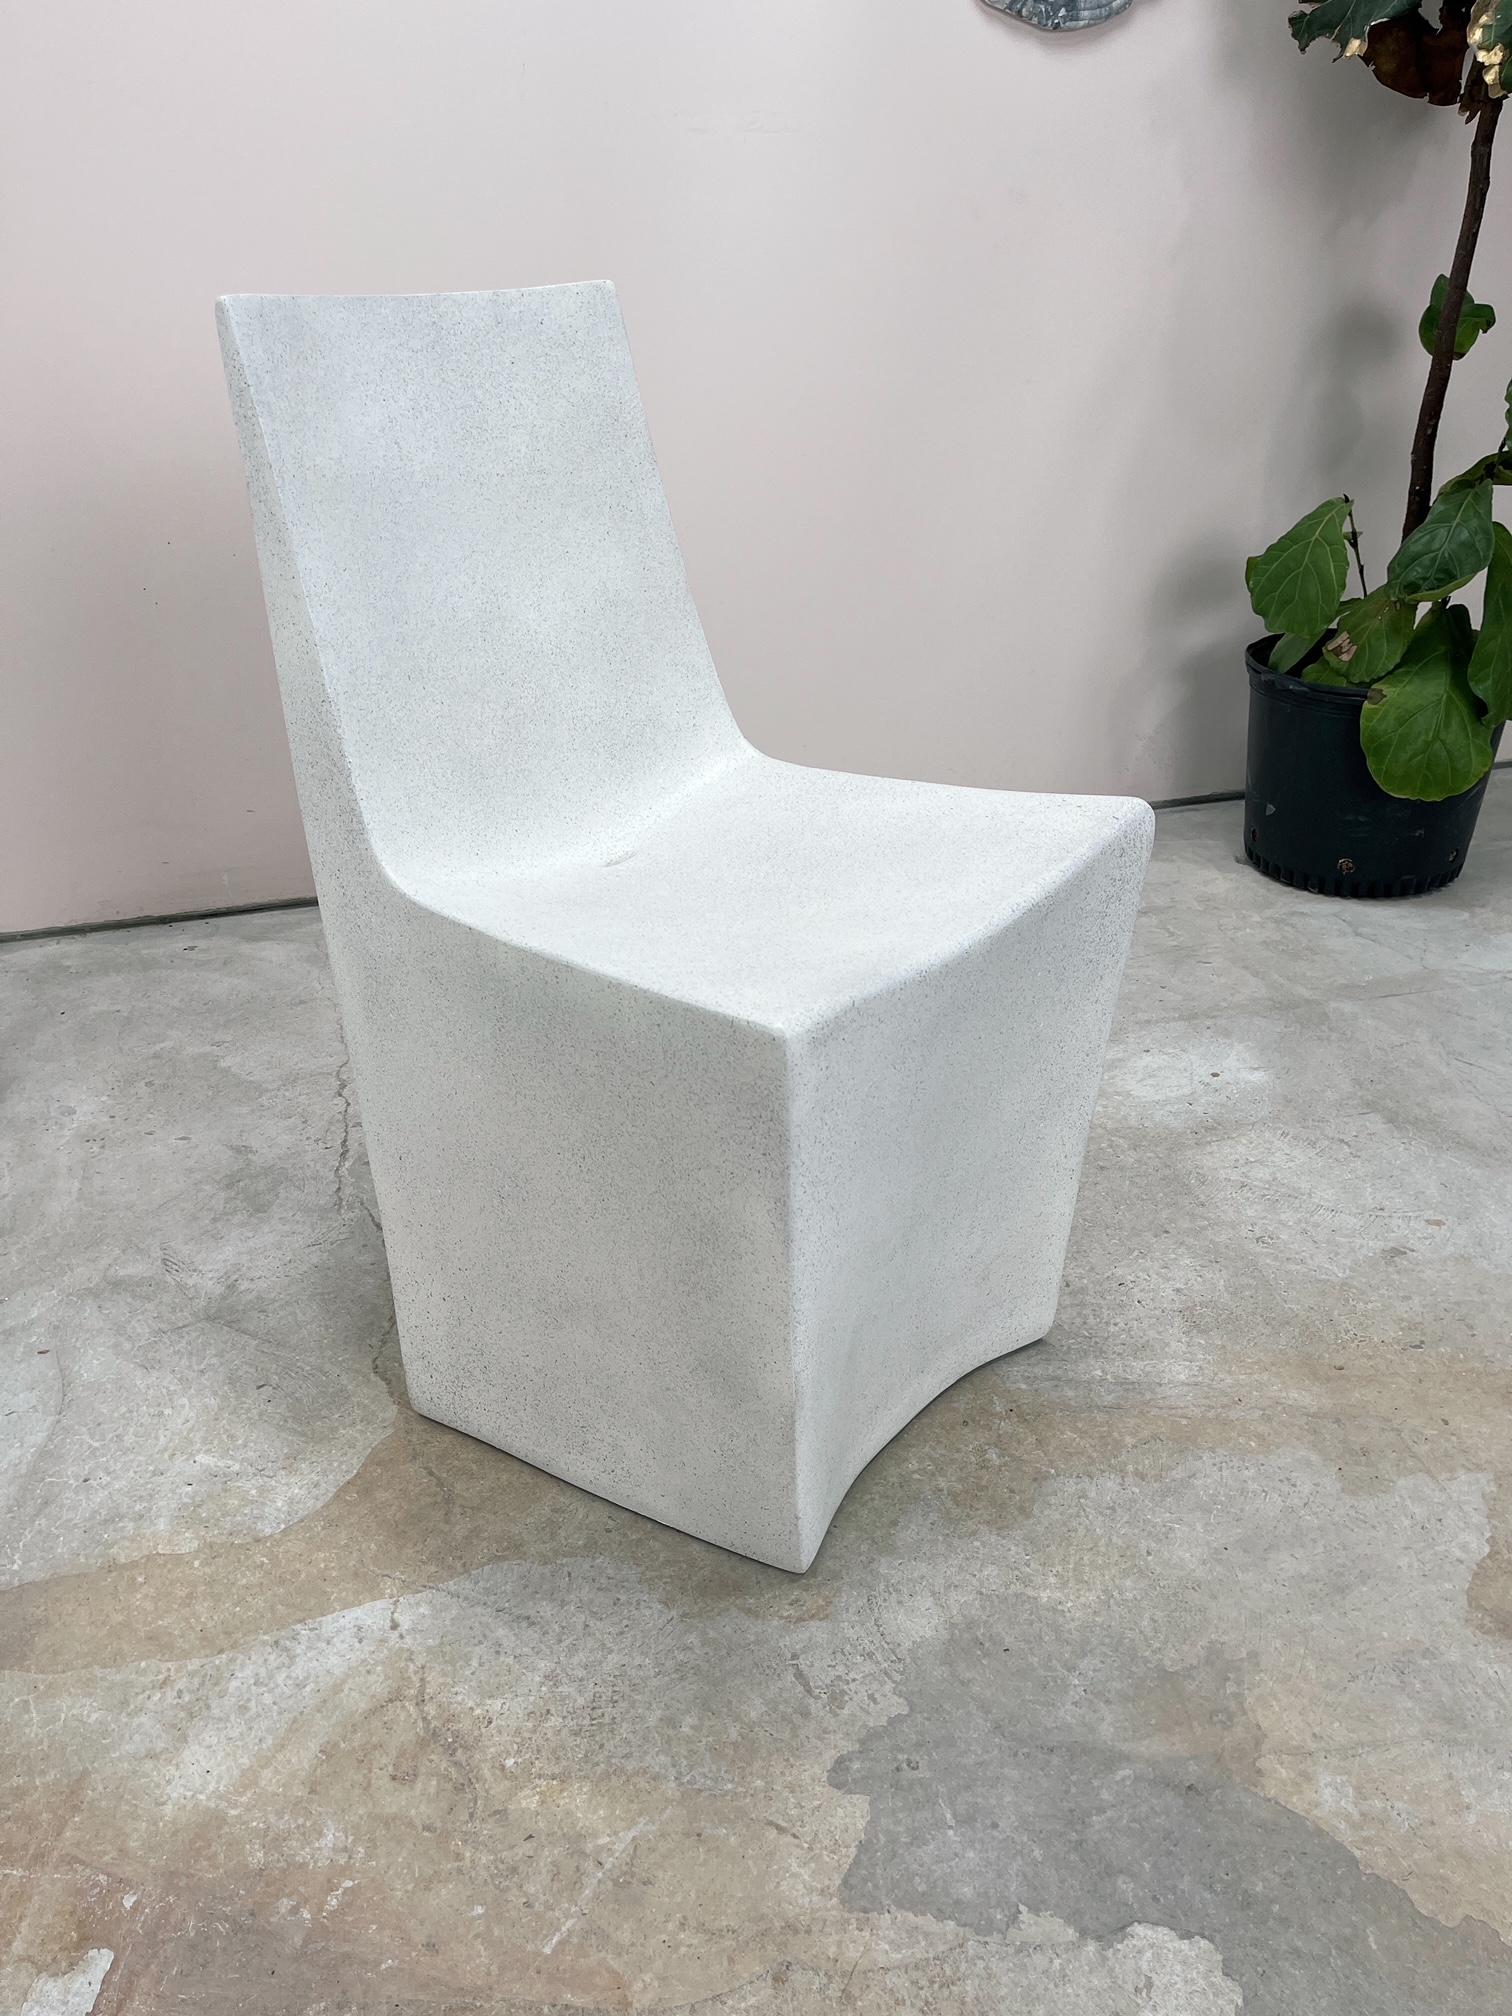 Classic longevity. Surprising comfort.

Dimensions: Width 17 in. (43.2 cm), depth 20 in. (50.8 cm), height 33 in. (83.8 cm). Weight 35 lbs. (15.8 kg)
No assembly required.

Finish color options:
white stone (shown)
natural stone
aged